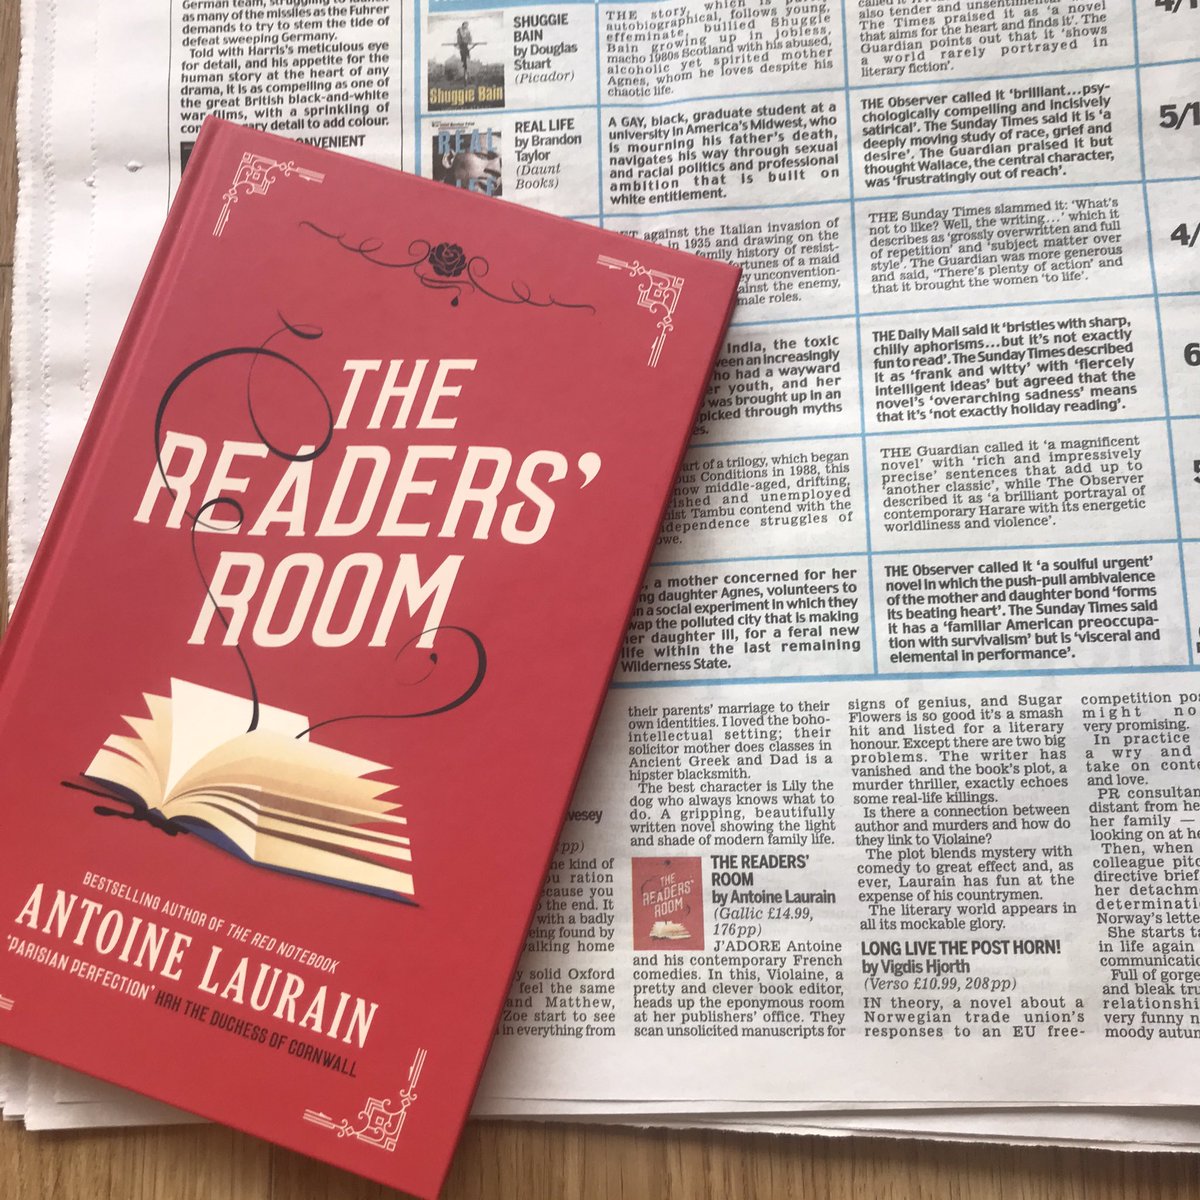 The Readers’ Room by Antoine Laurain is published today! Daily Mail says ‘J’adore Antoine and his contemporary French comedies...The literary world appears in all its mockable glory’ #TheReadersRoom